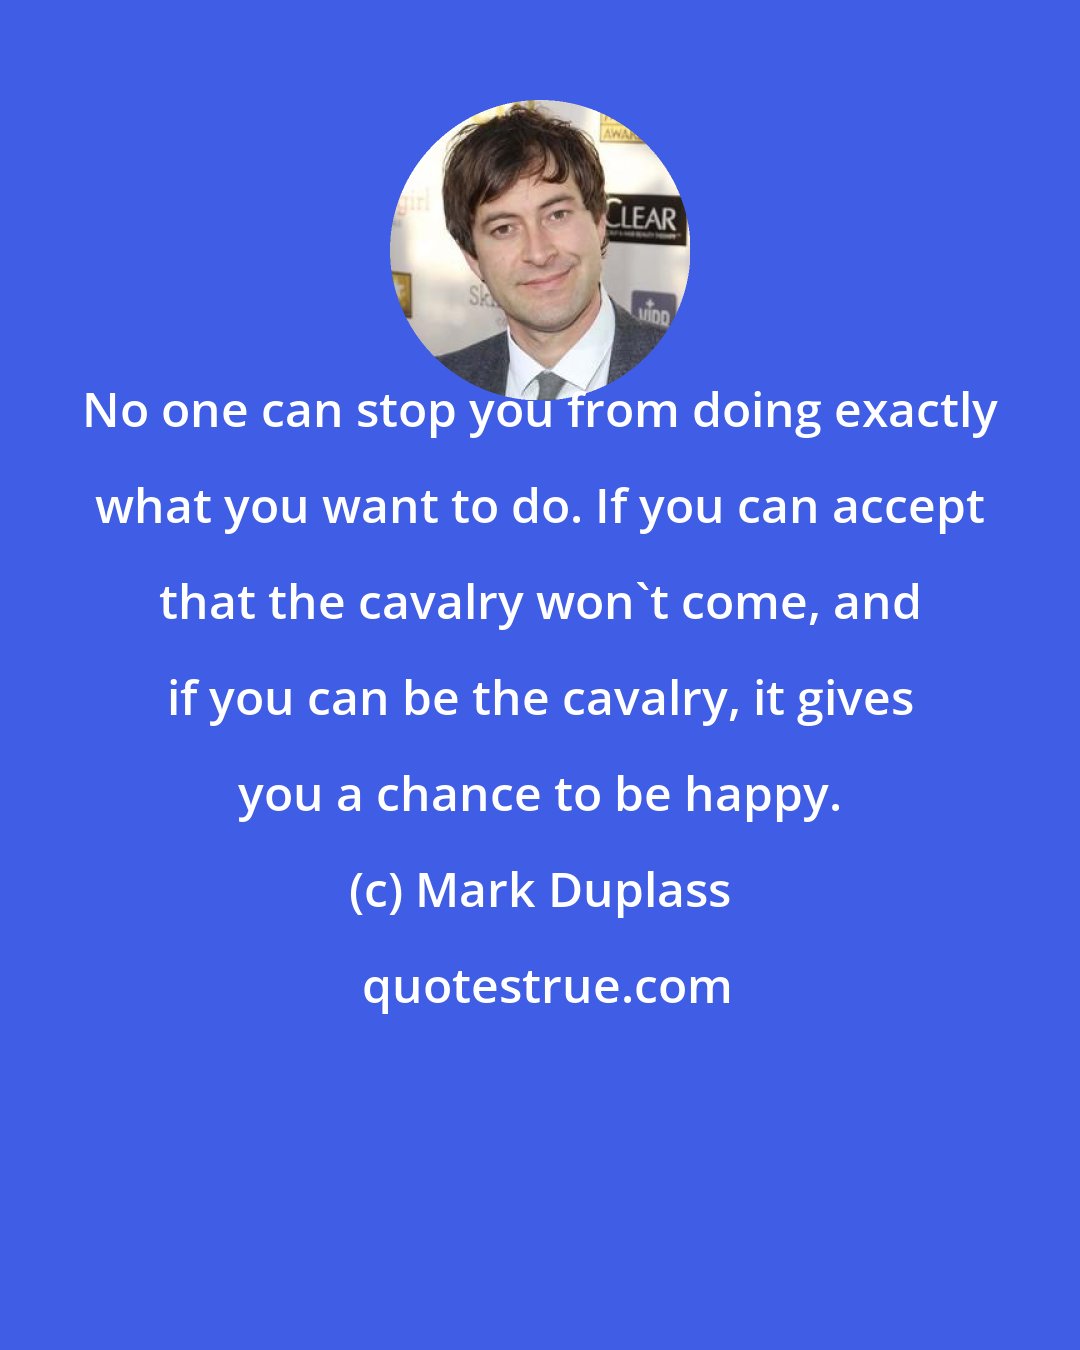 Mark Duplass: No one can stop you from doing exactly what you want to do. If you can accept that the cavalry won't come, and if you can be the cavalry, it gives you a chance to be happy.